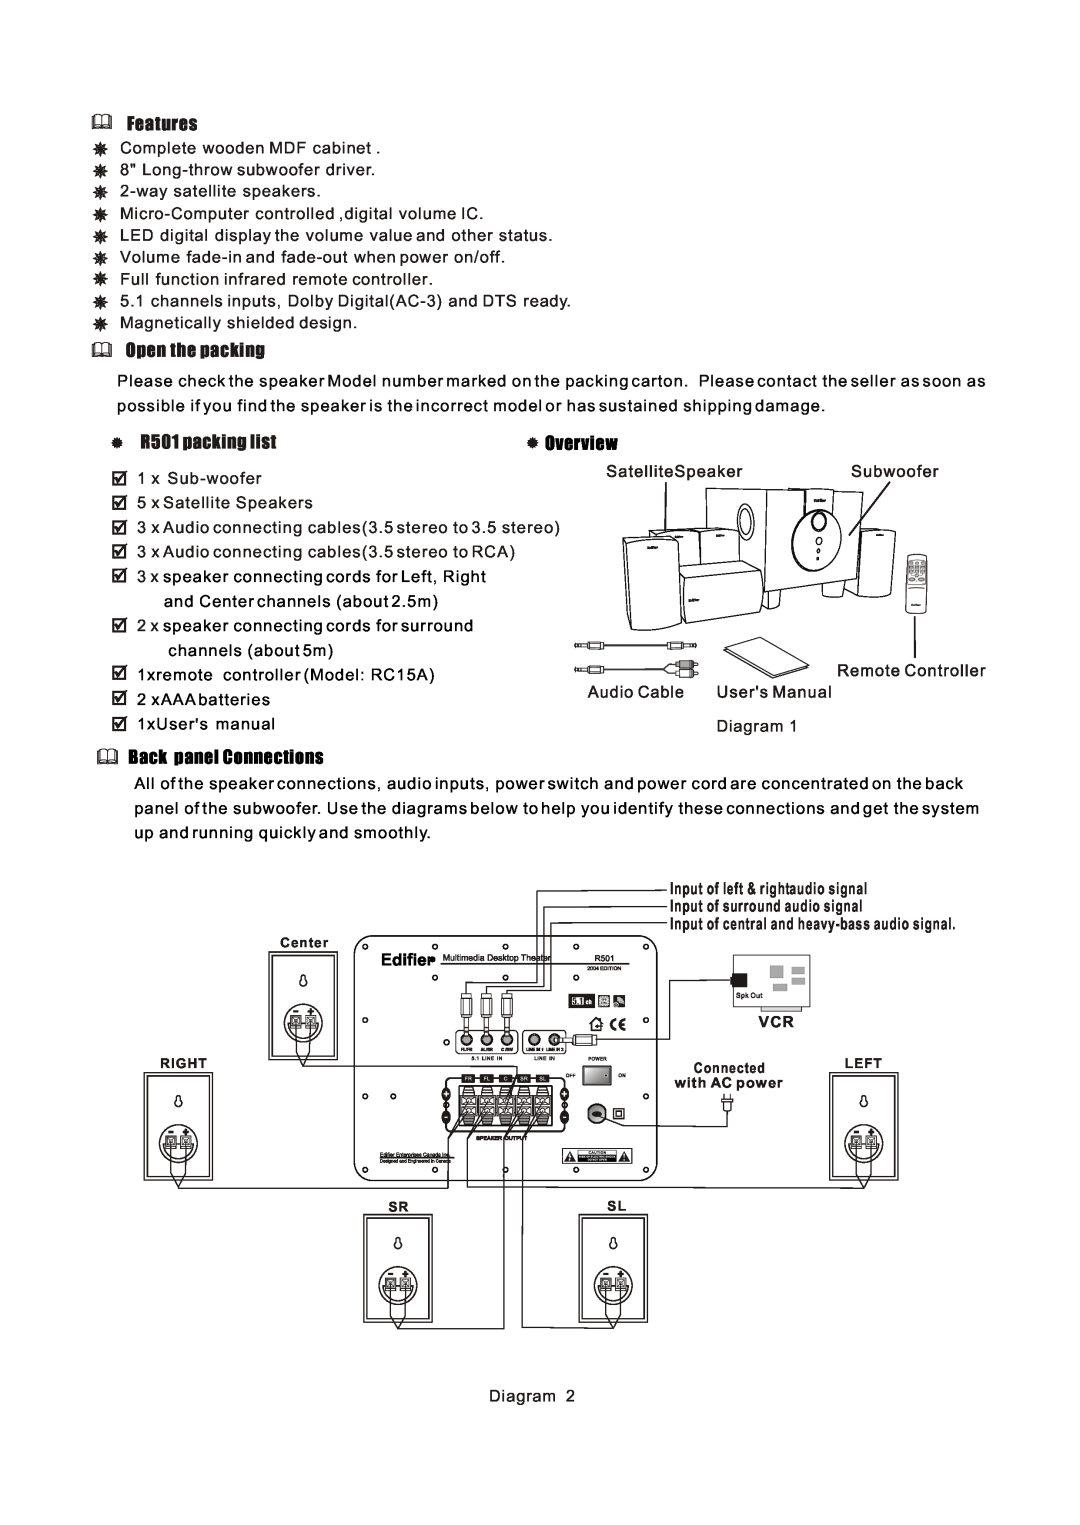 Edifier Enterprises Canada user manual Features, Open the packing, R501 packing list Overview, Back panel Connections 